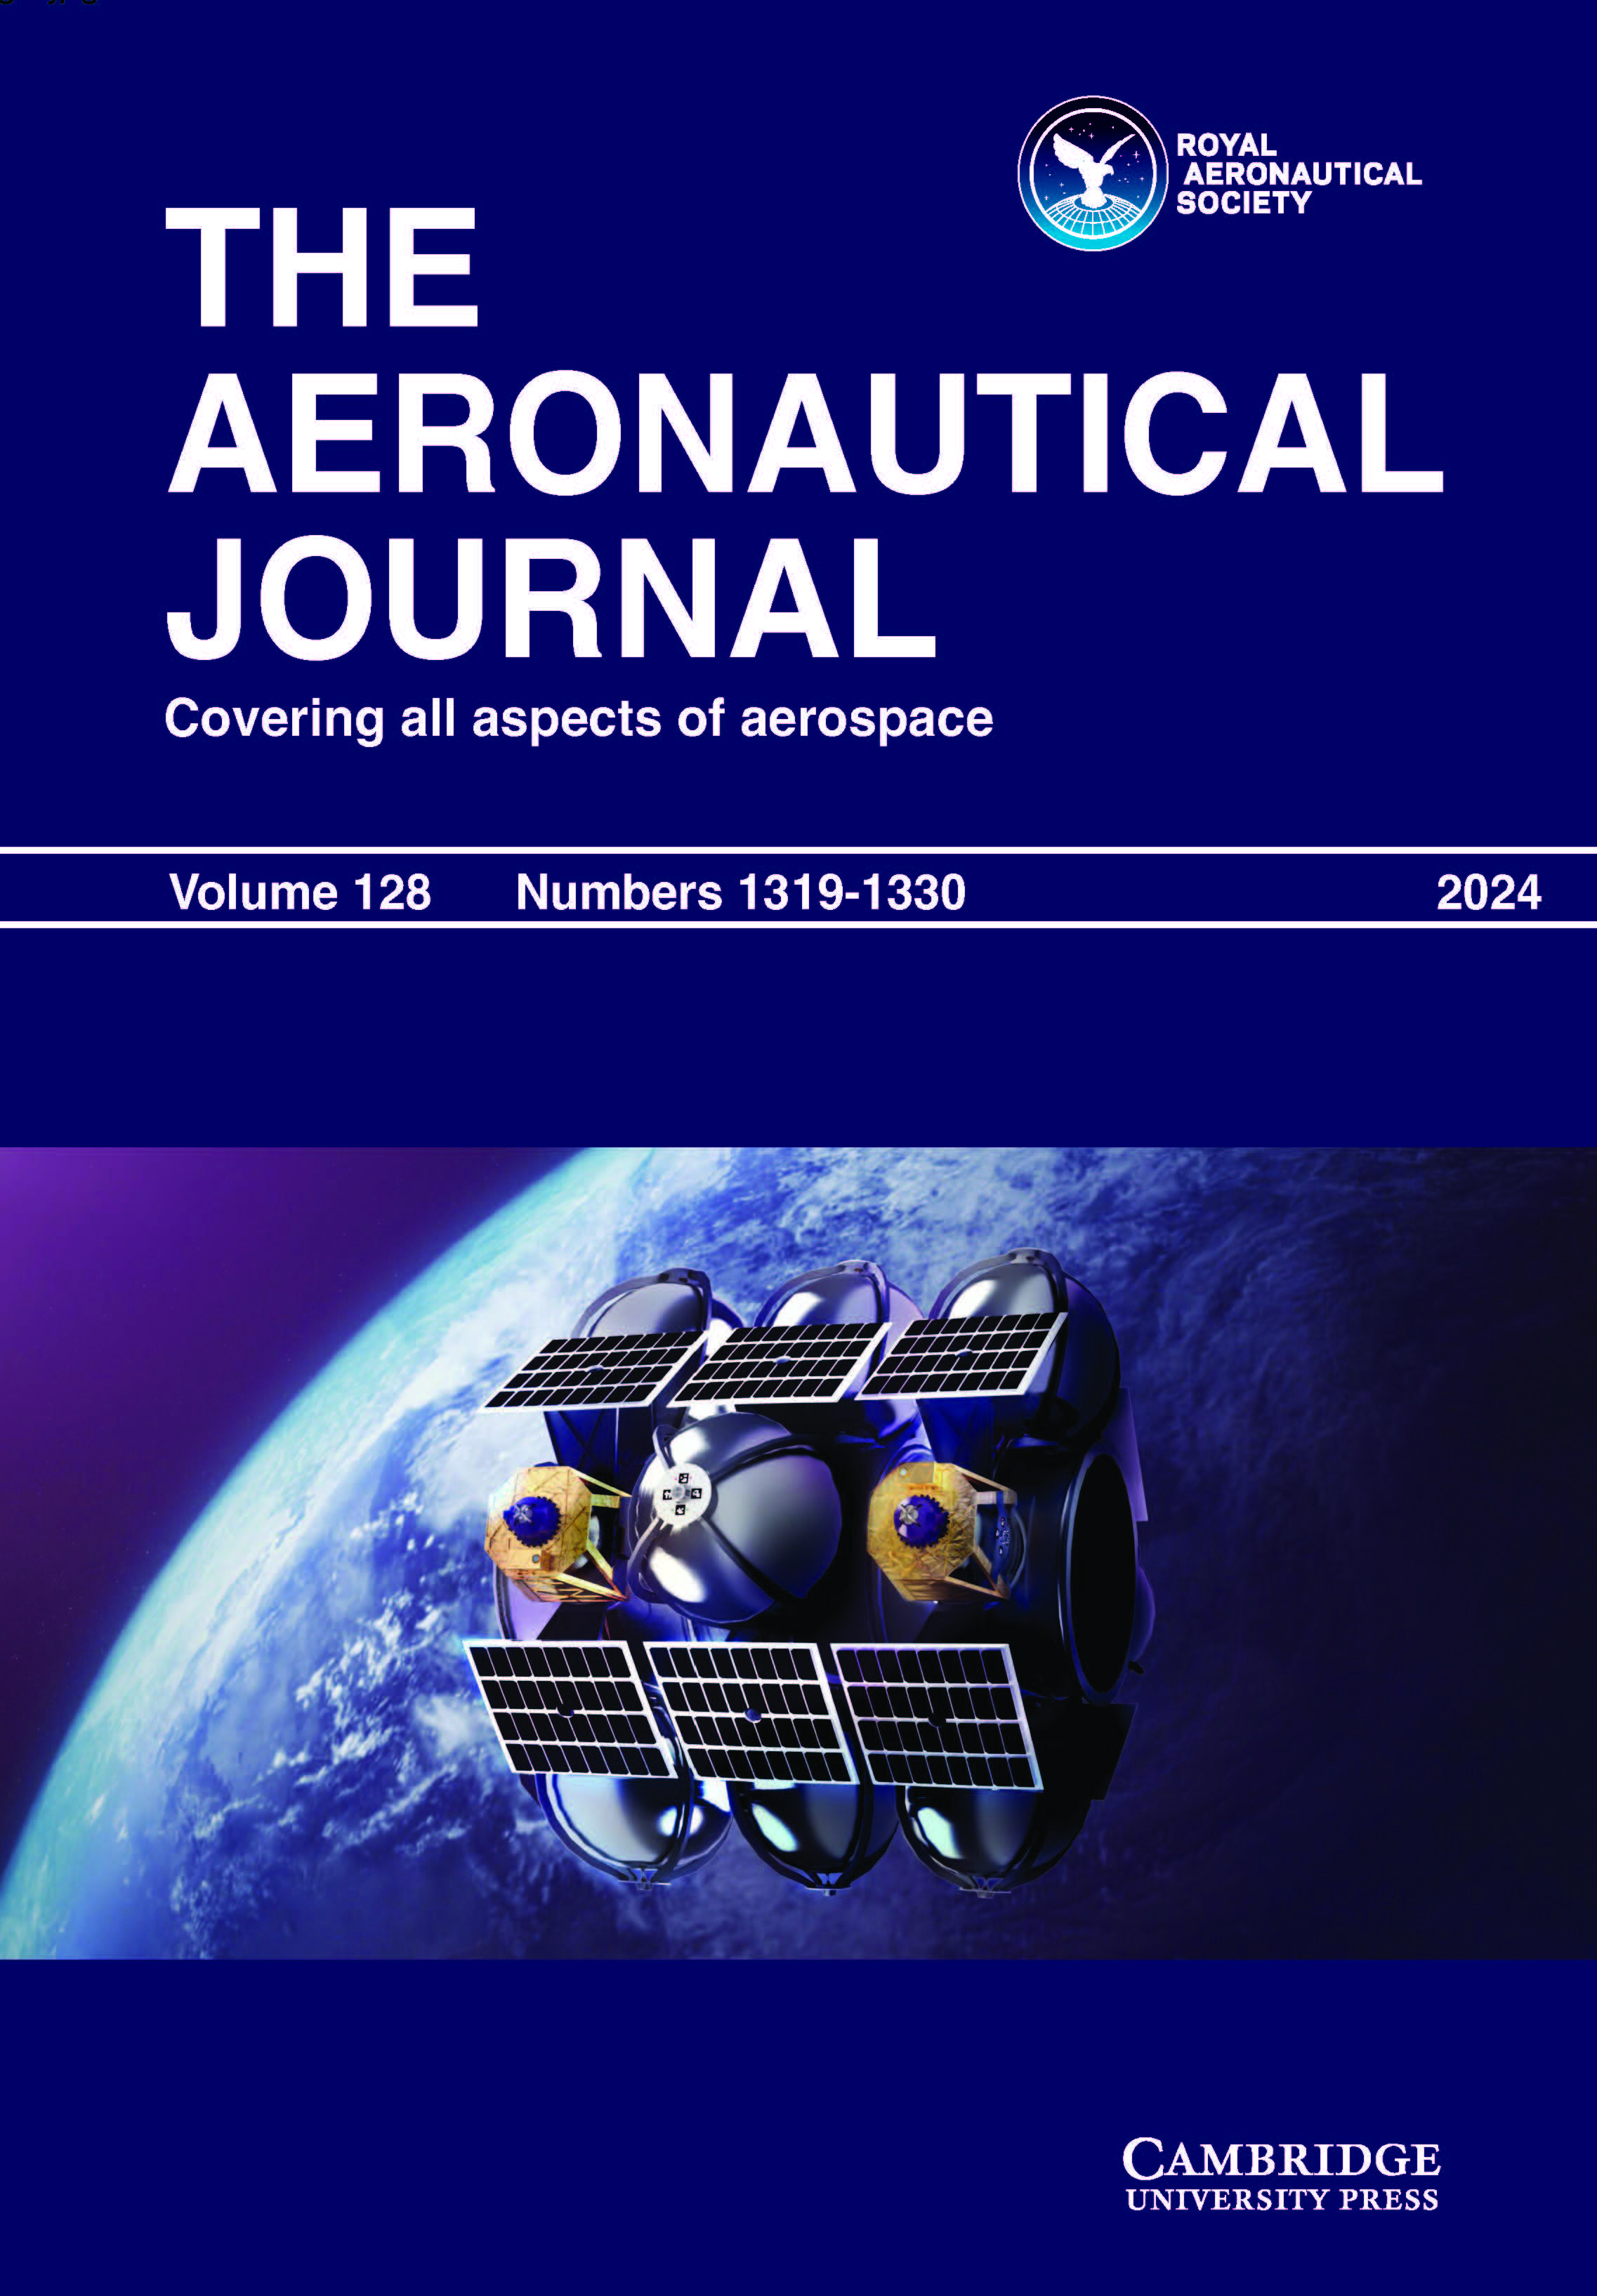 Aerodynamic considerations of blended wing body aircraft